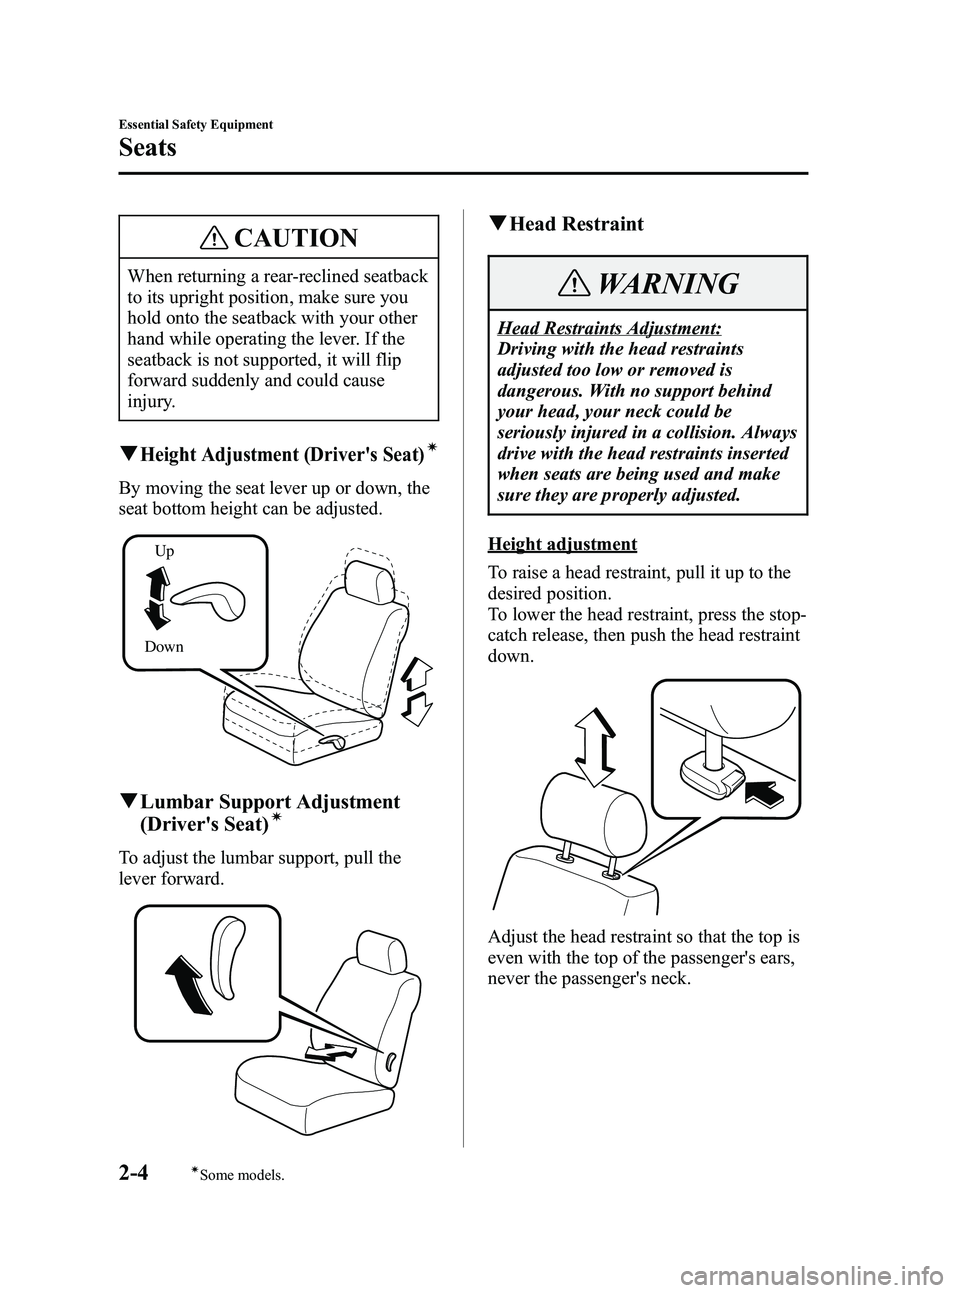 MAZDA MODEL 5 2006 User Guide Black plate (18,1)
CAUTION
When returning a rear-reclined seatback
to its upright position, make sure you
hold onto the seatback with your other
hand while operating the lever. If the
seatback is not 